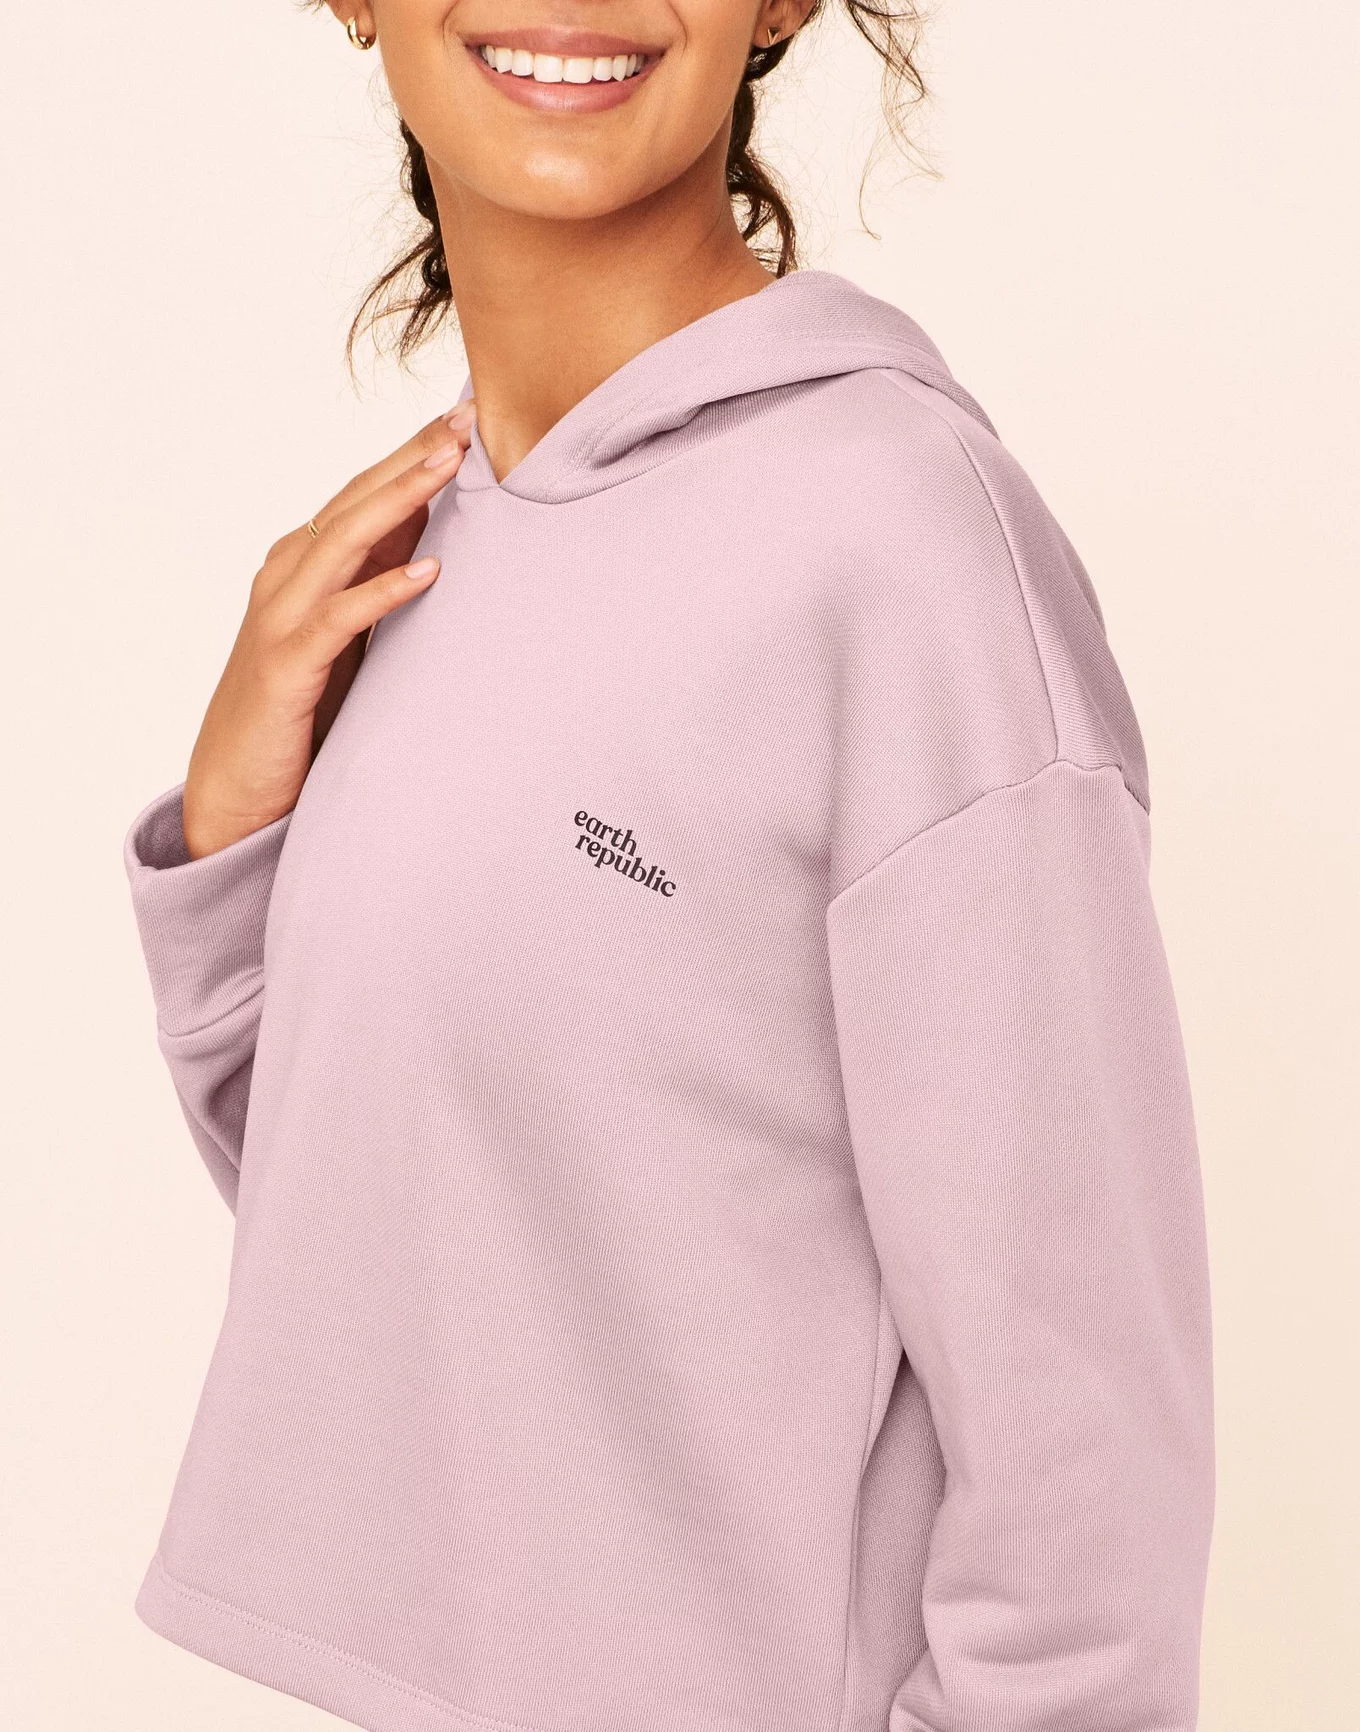 AnyBody Luxe Lounge Lace Up Hoodie 